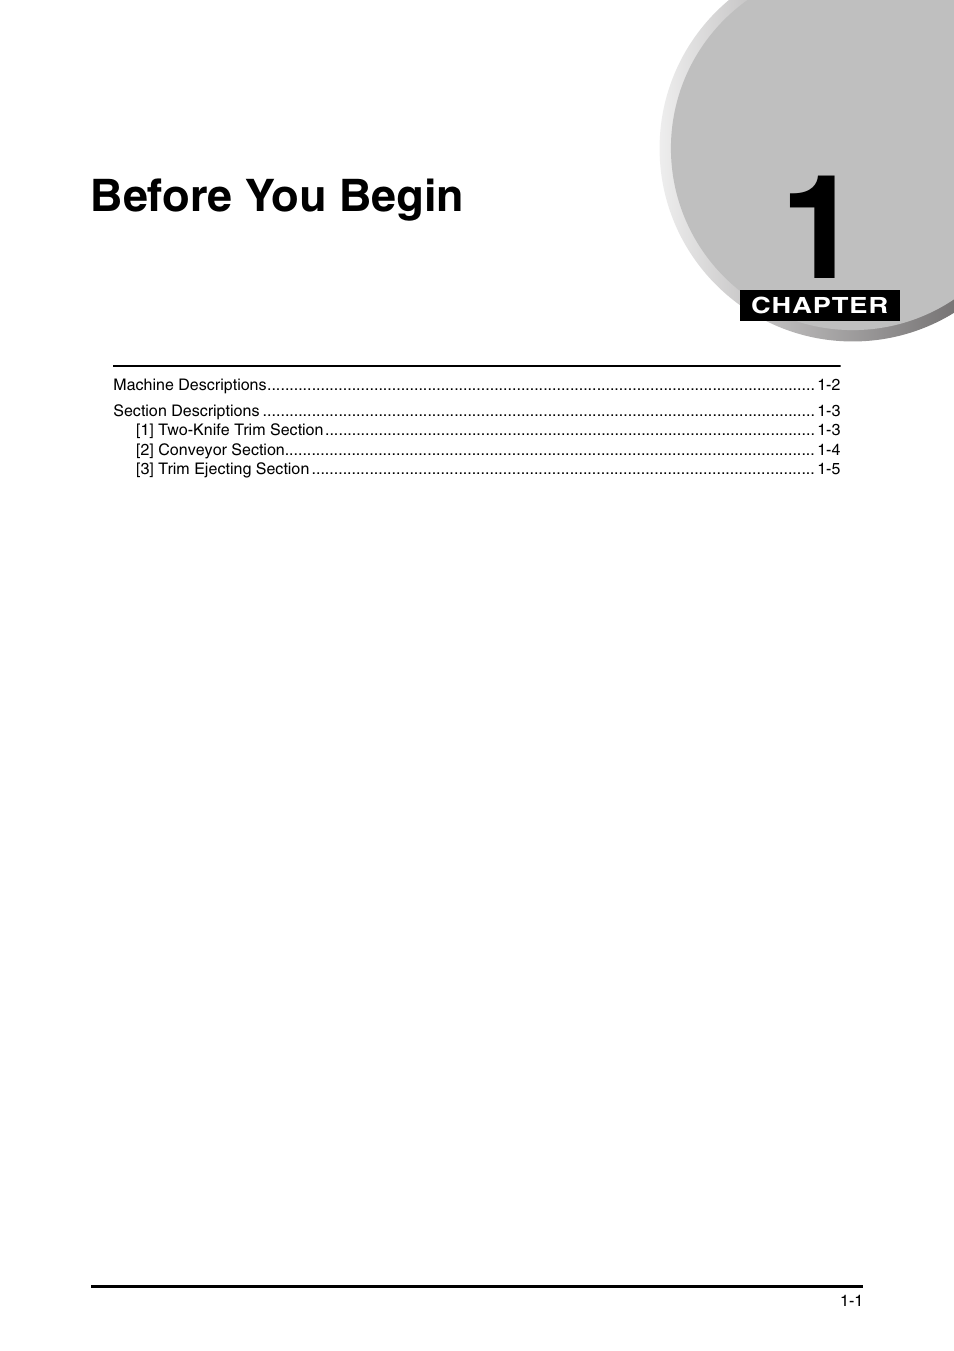 Before you begin, Section 1 | Canon Trimmer User Manual | Page 8 / 26